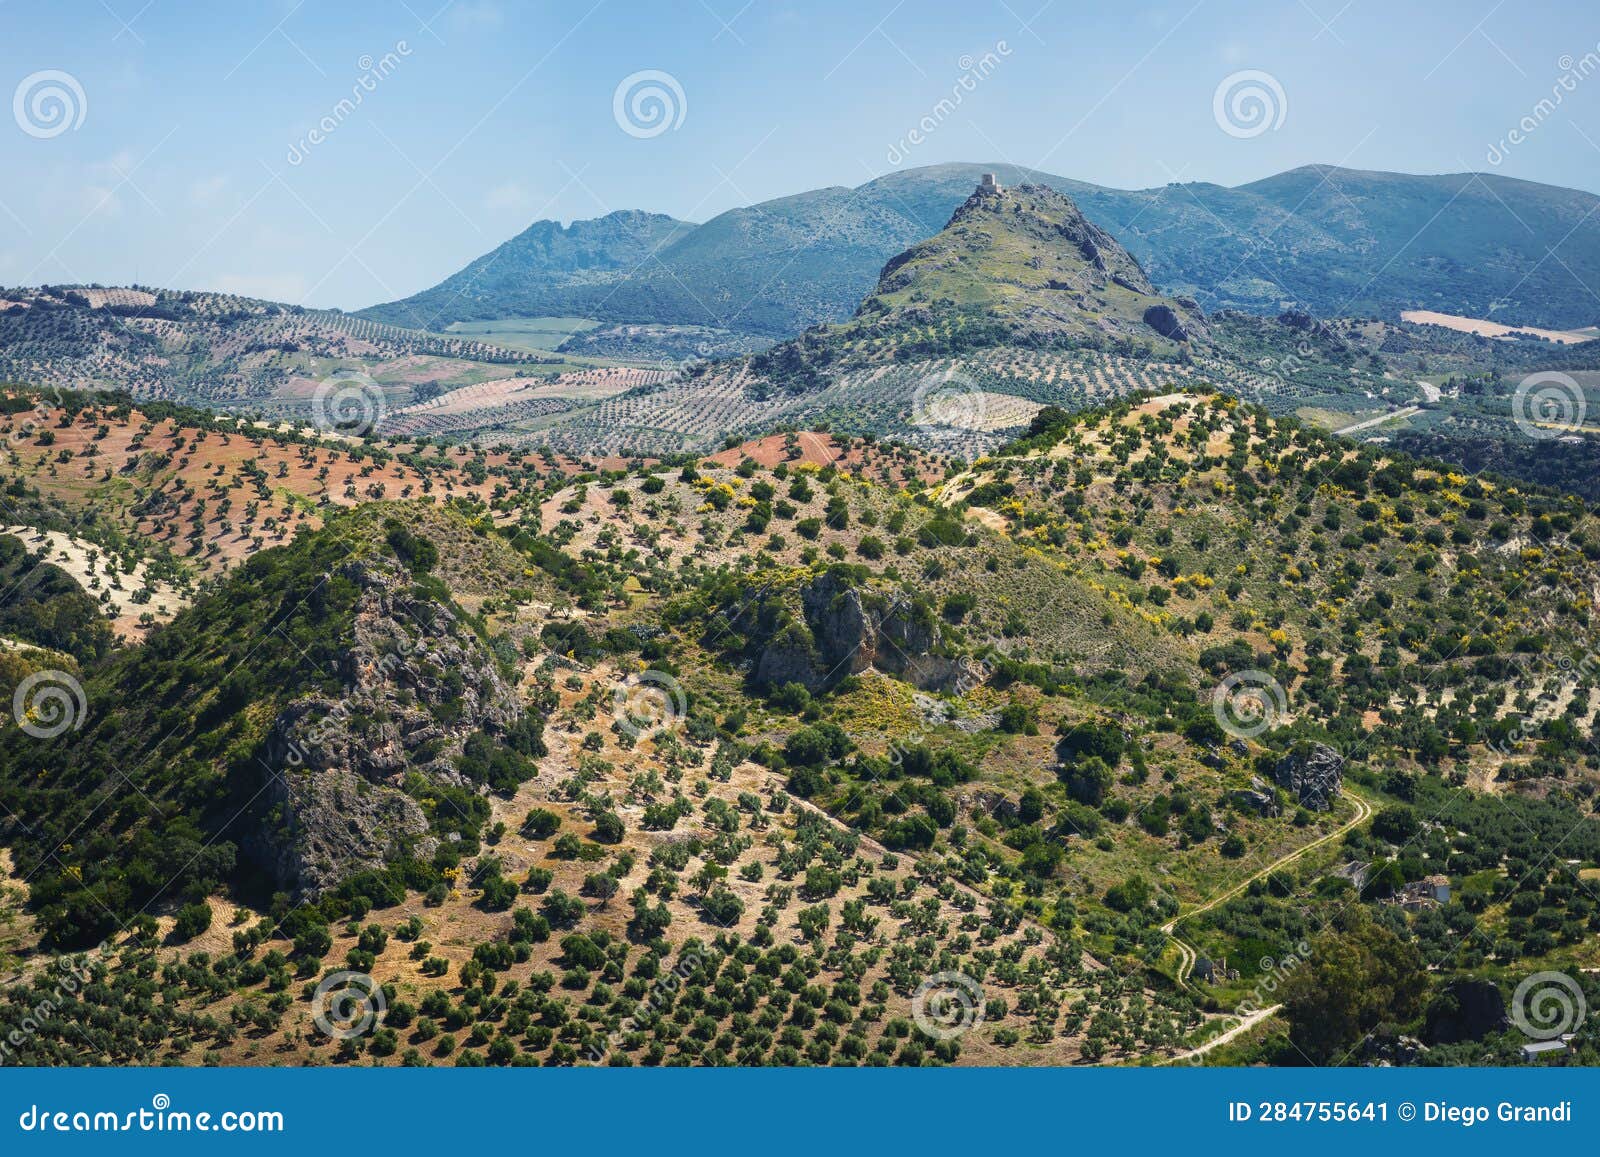 mountains view from olvera with the iron castle of pruna - olvera, andalusia, spain